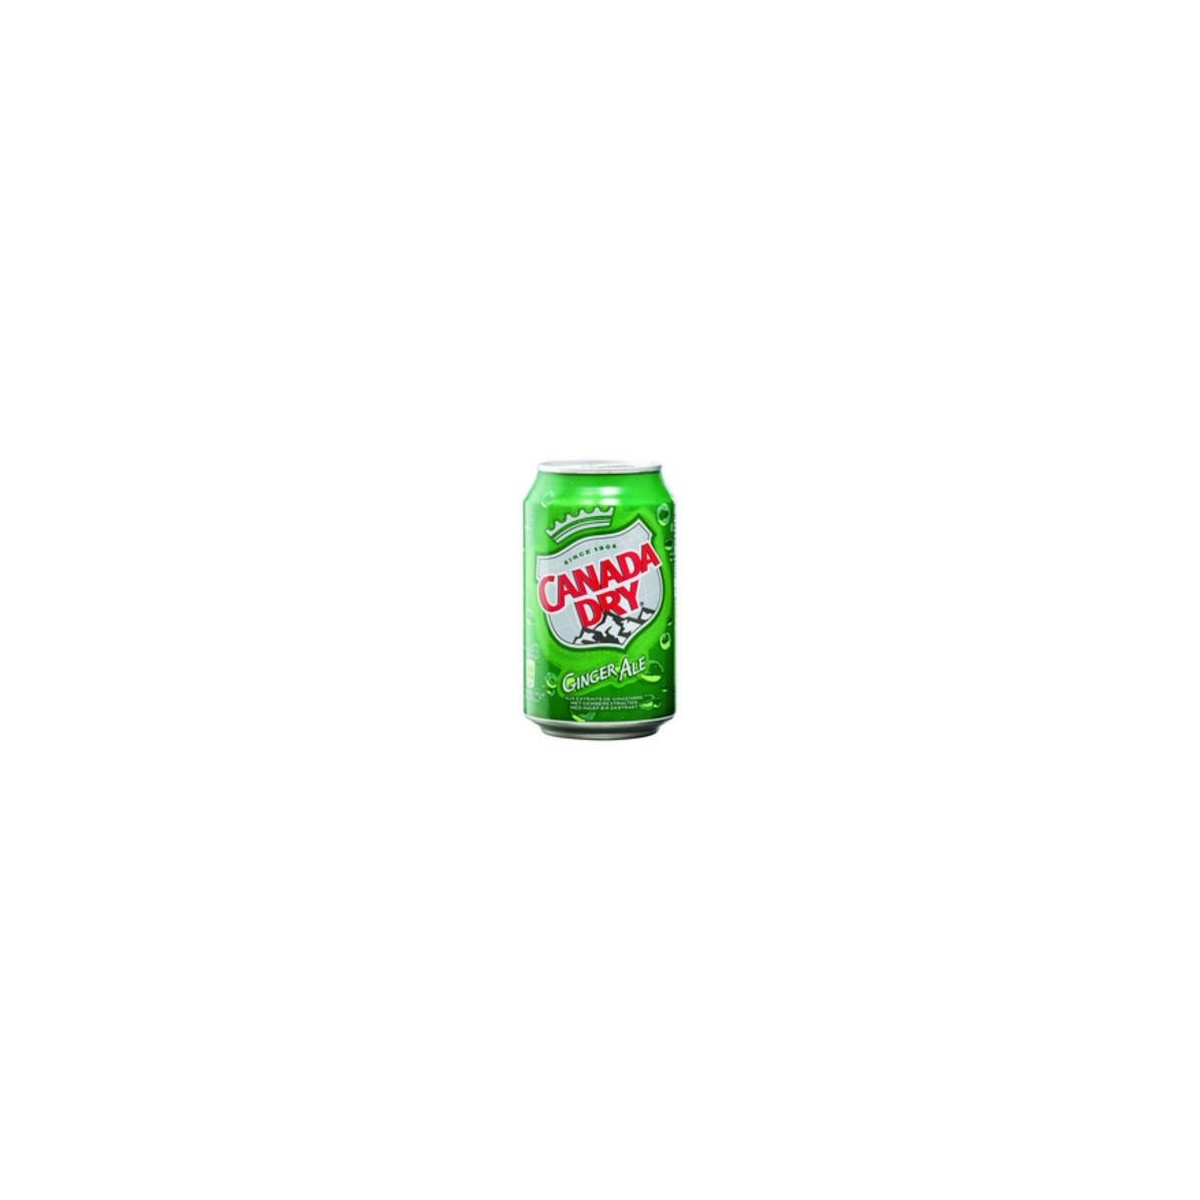 CANADA DRY 24 X 33CL CAN  TRAY